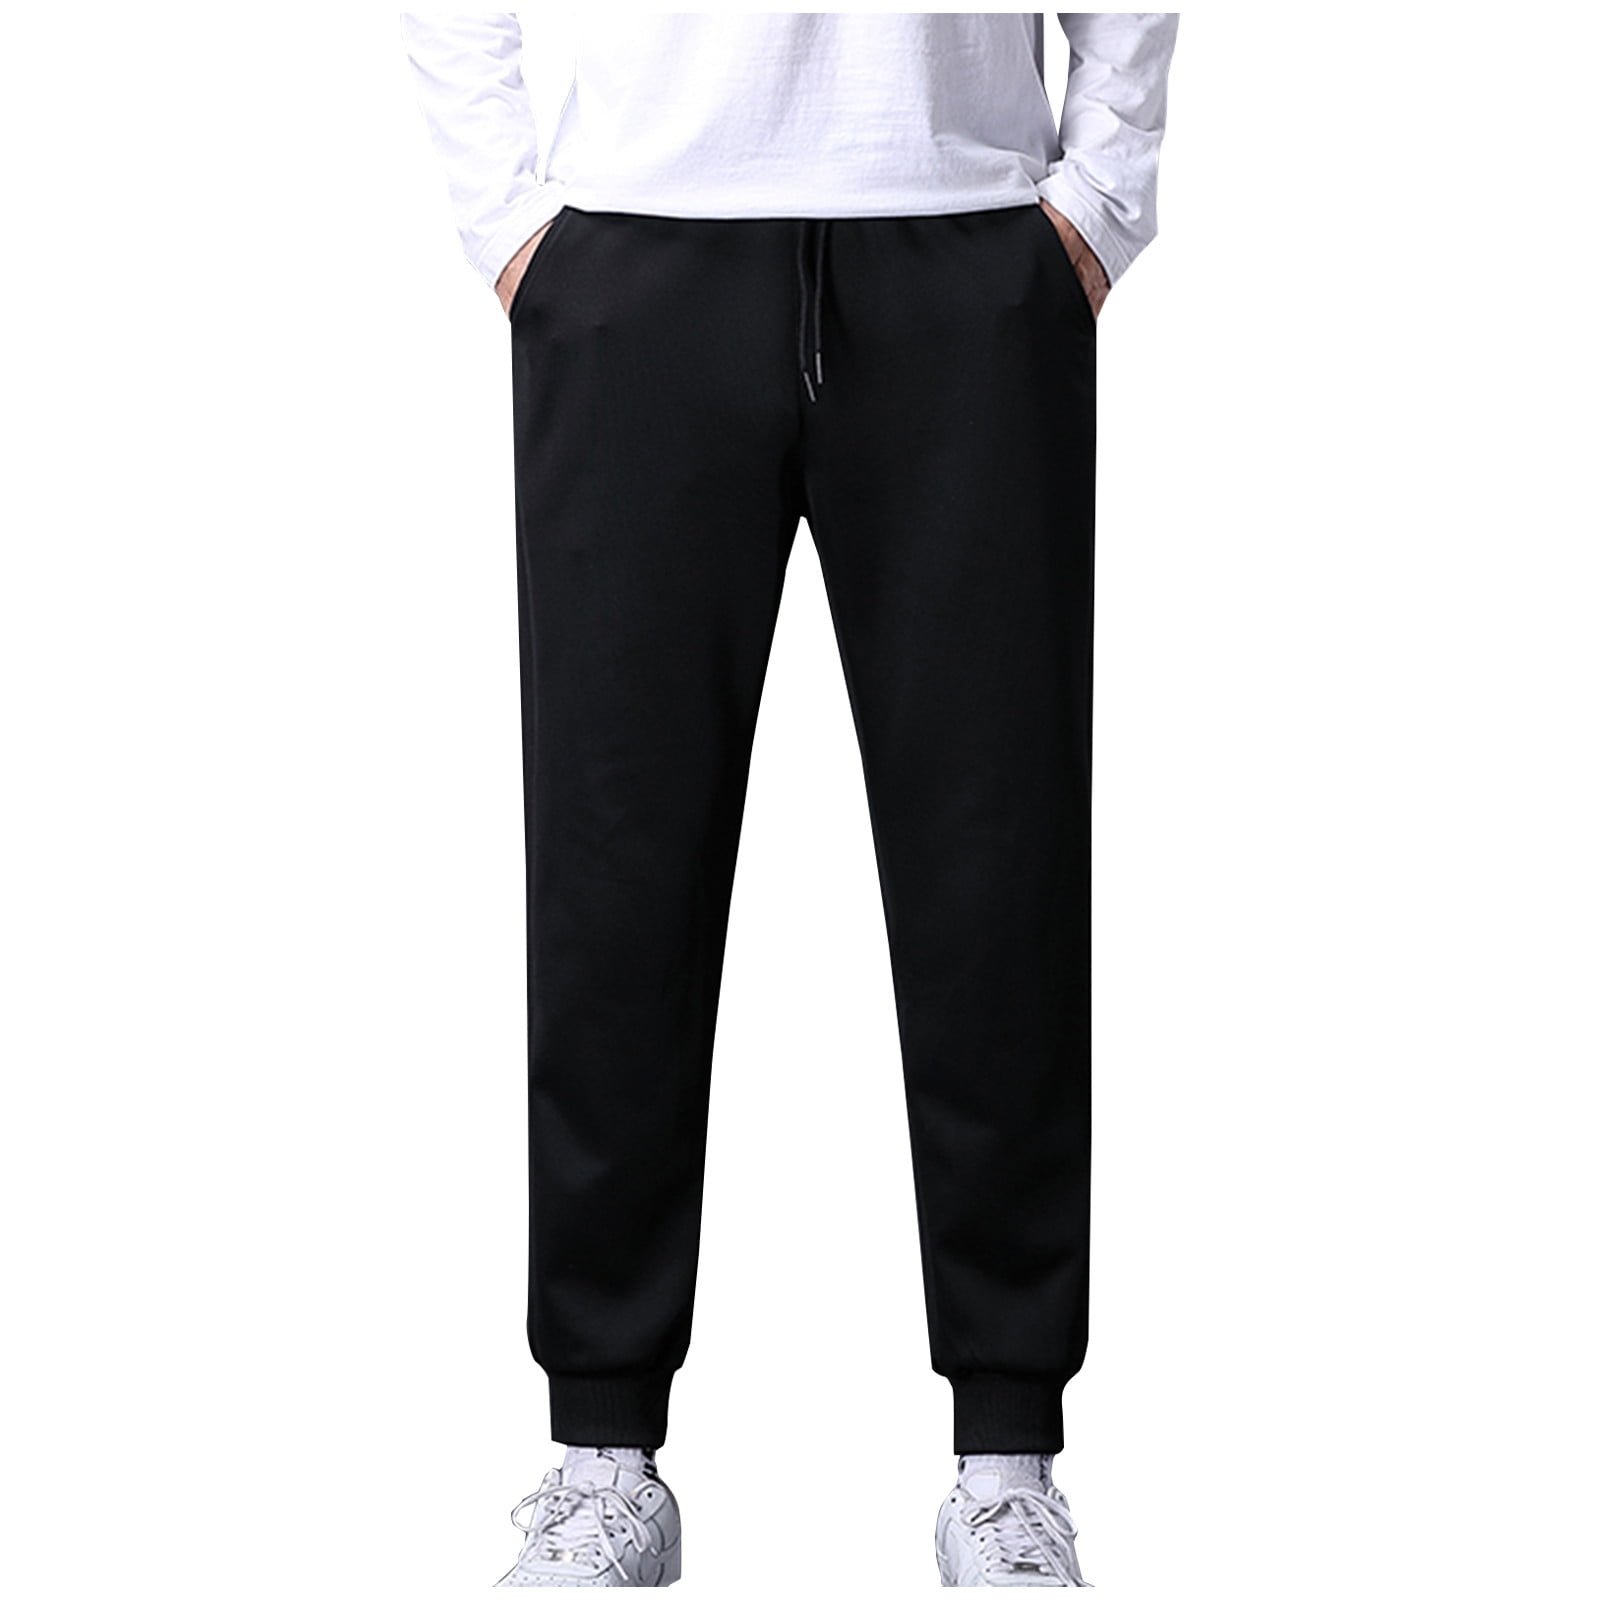 Mens Basic Cuffed Joggers,Cotton-Blend Jersey Track Pants, Loose Fit Sweatpants -